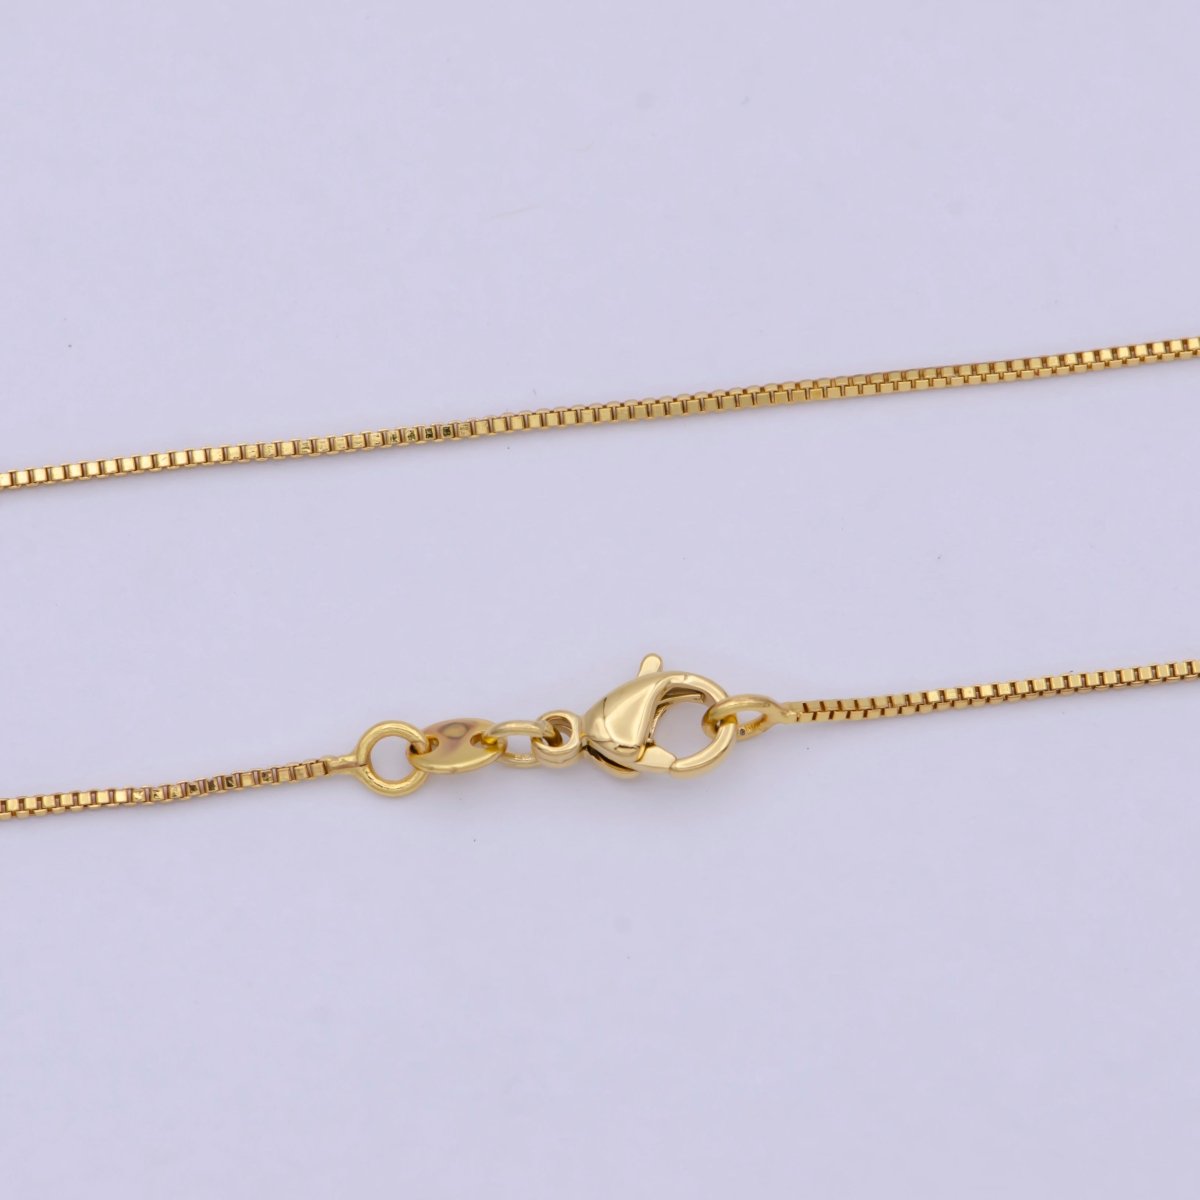 0.8 mm Chain box necklace, 24k gold filled chain box, Dainty gold filled chain, minimalist necklace 16 inch chain | WA-742 Clearance Pricing - DLUXCA